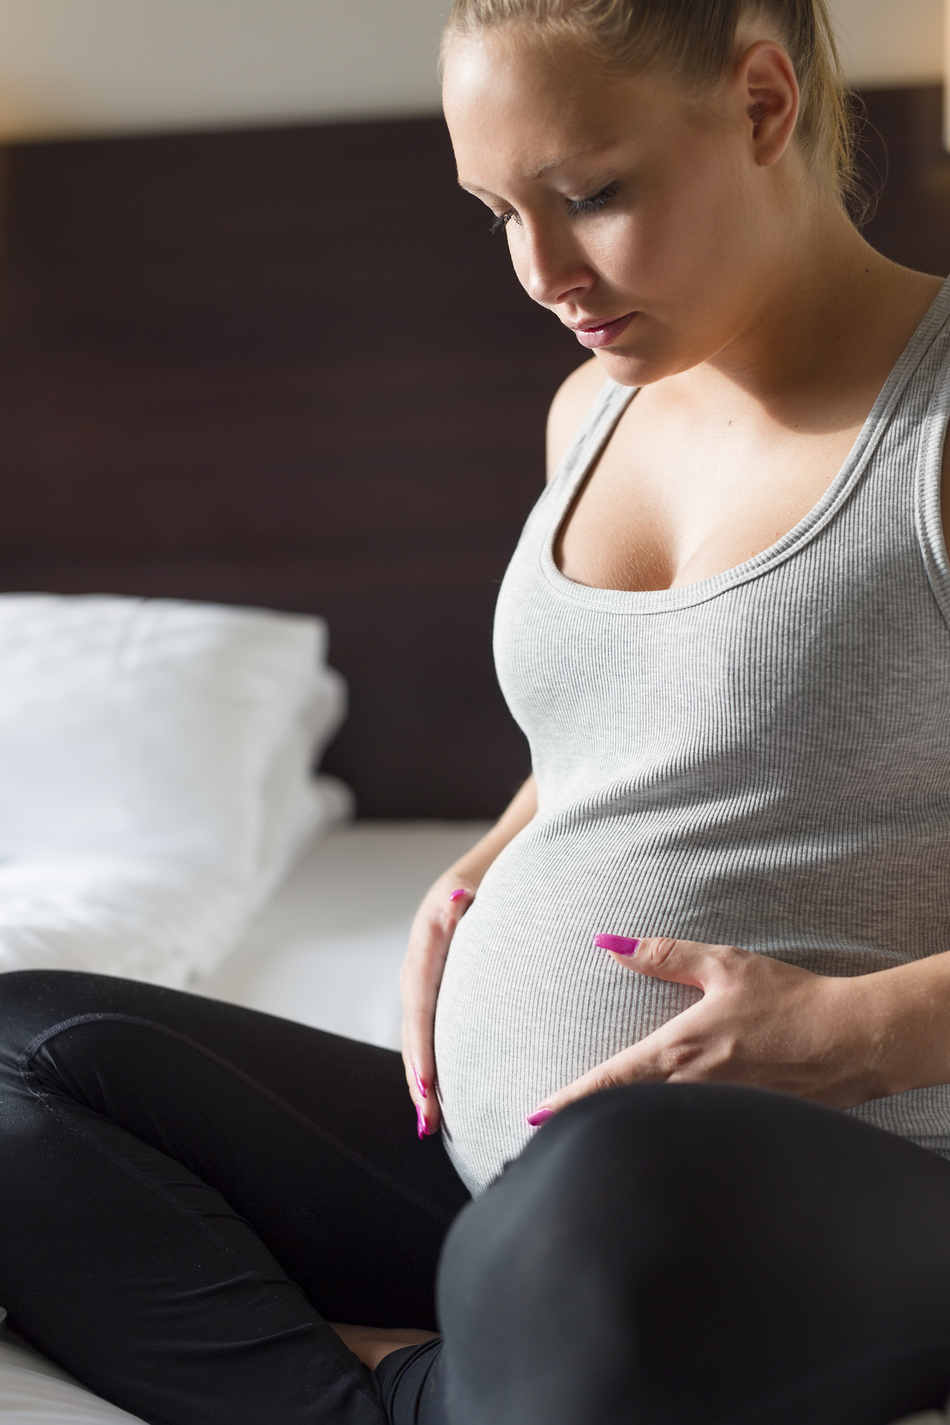 Are You at Risk for Pelvic Floor Issues After Childbirth?